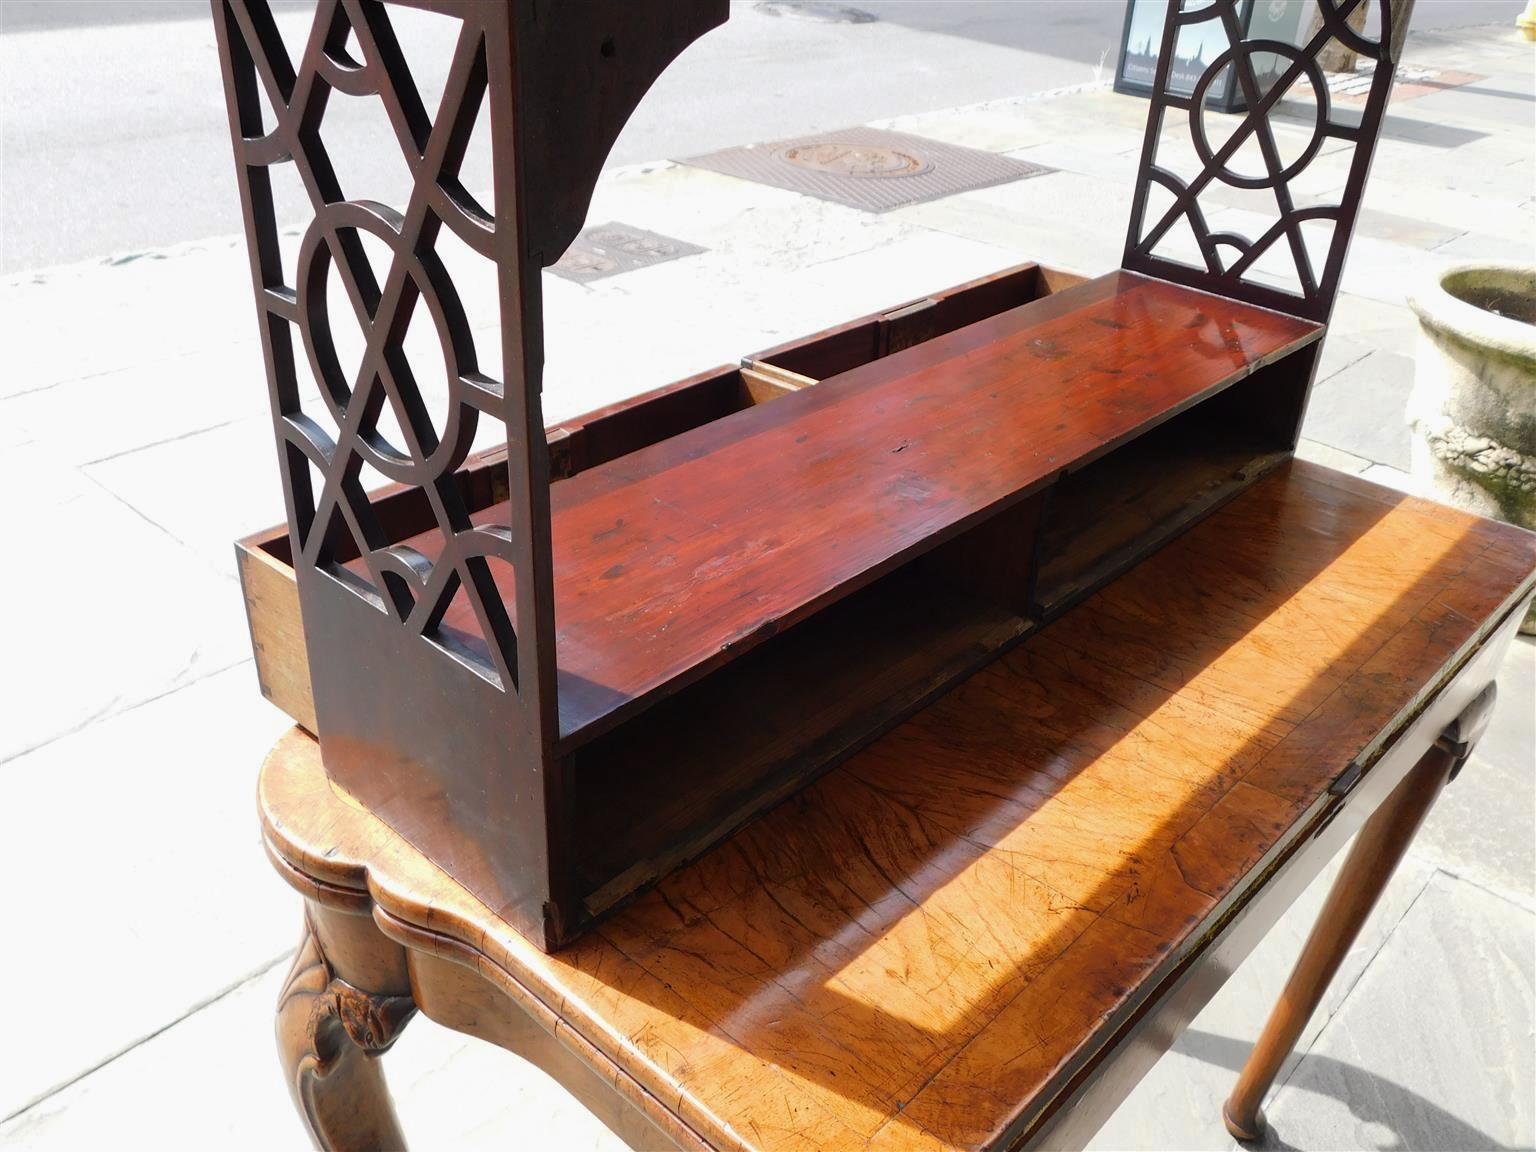 English Chippendale Mahogany Hanging Wall Shelf with Orig. Brasses, circa 1780 For Sale 5